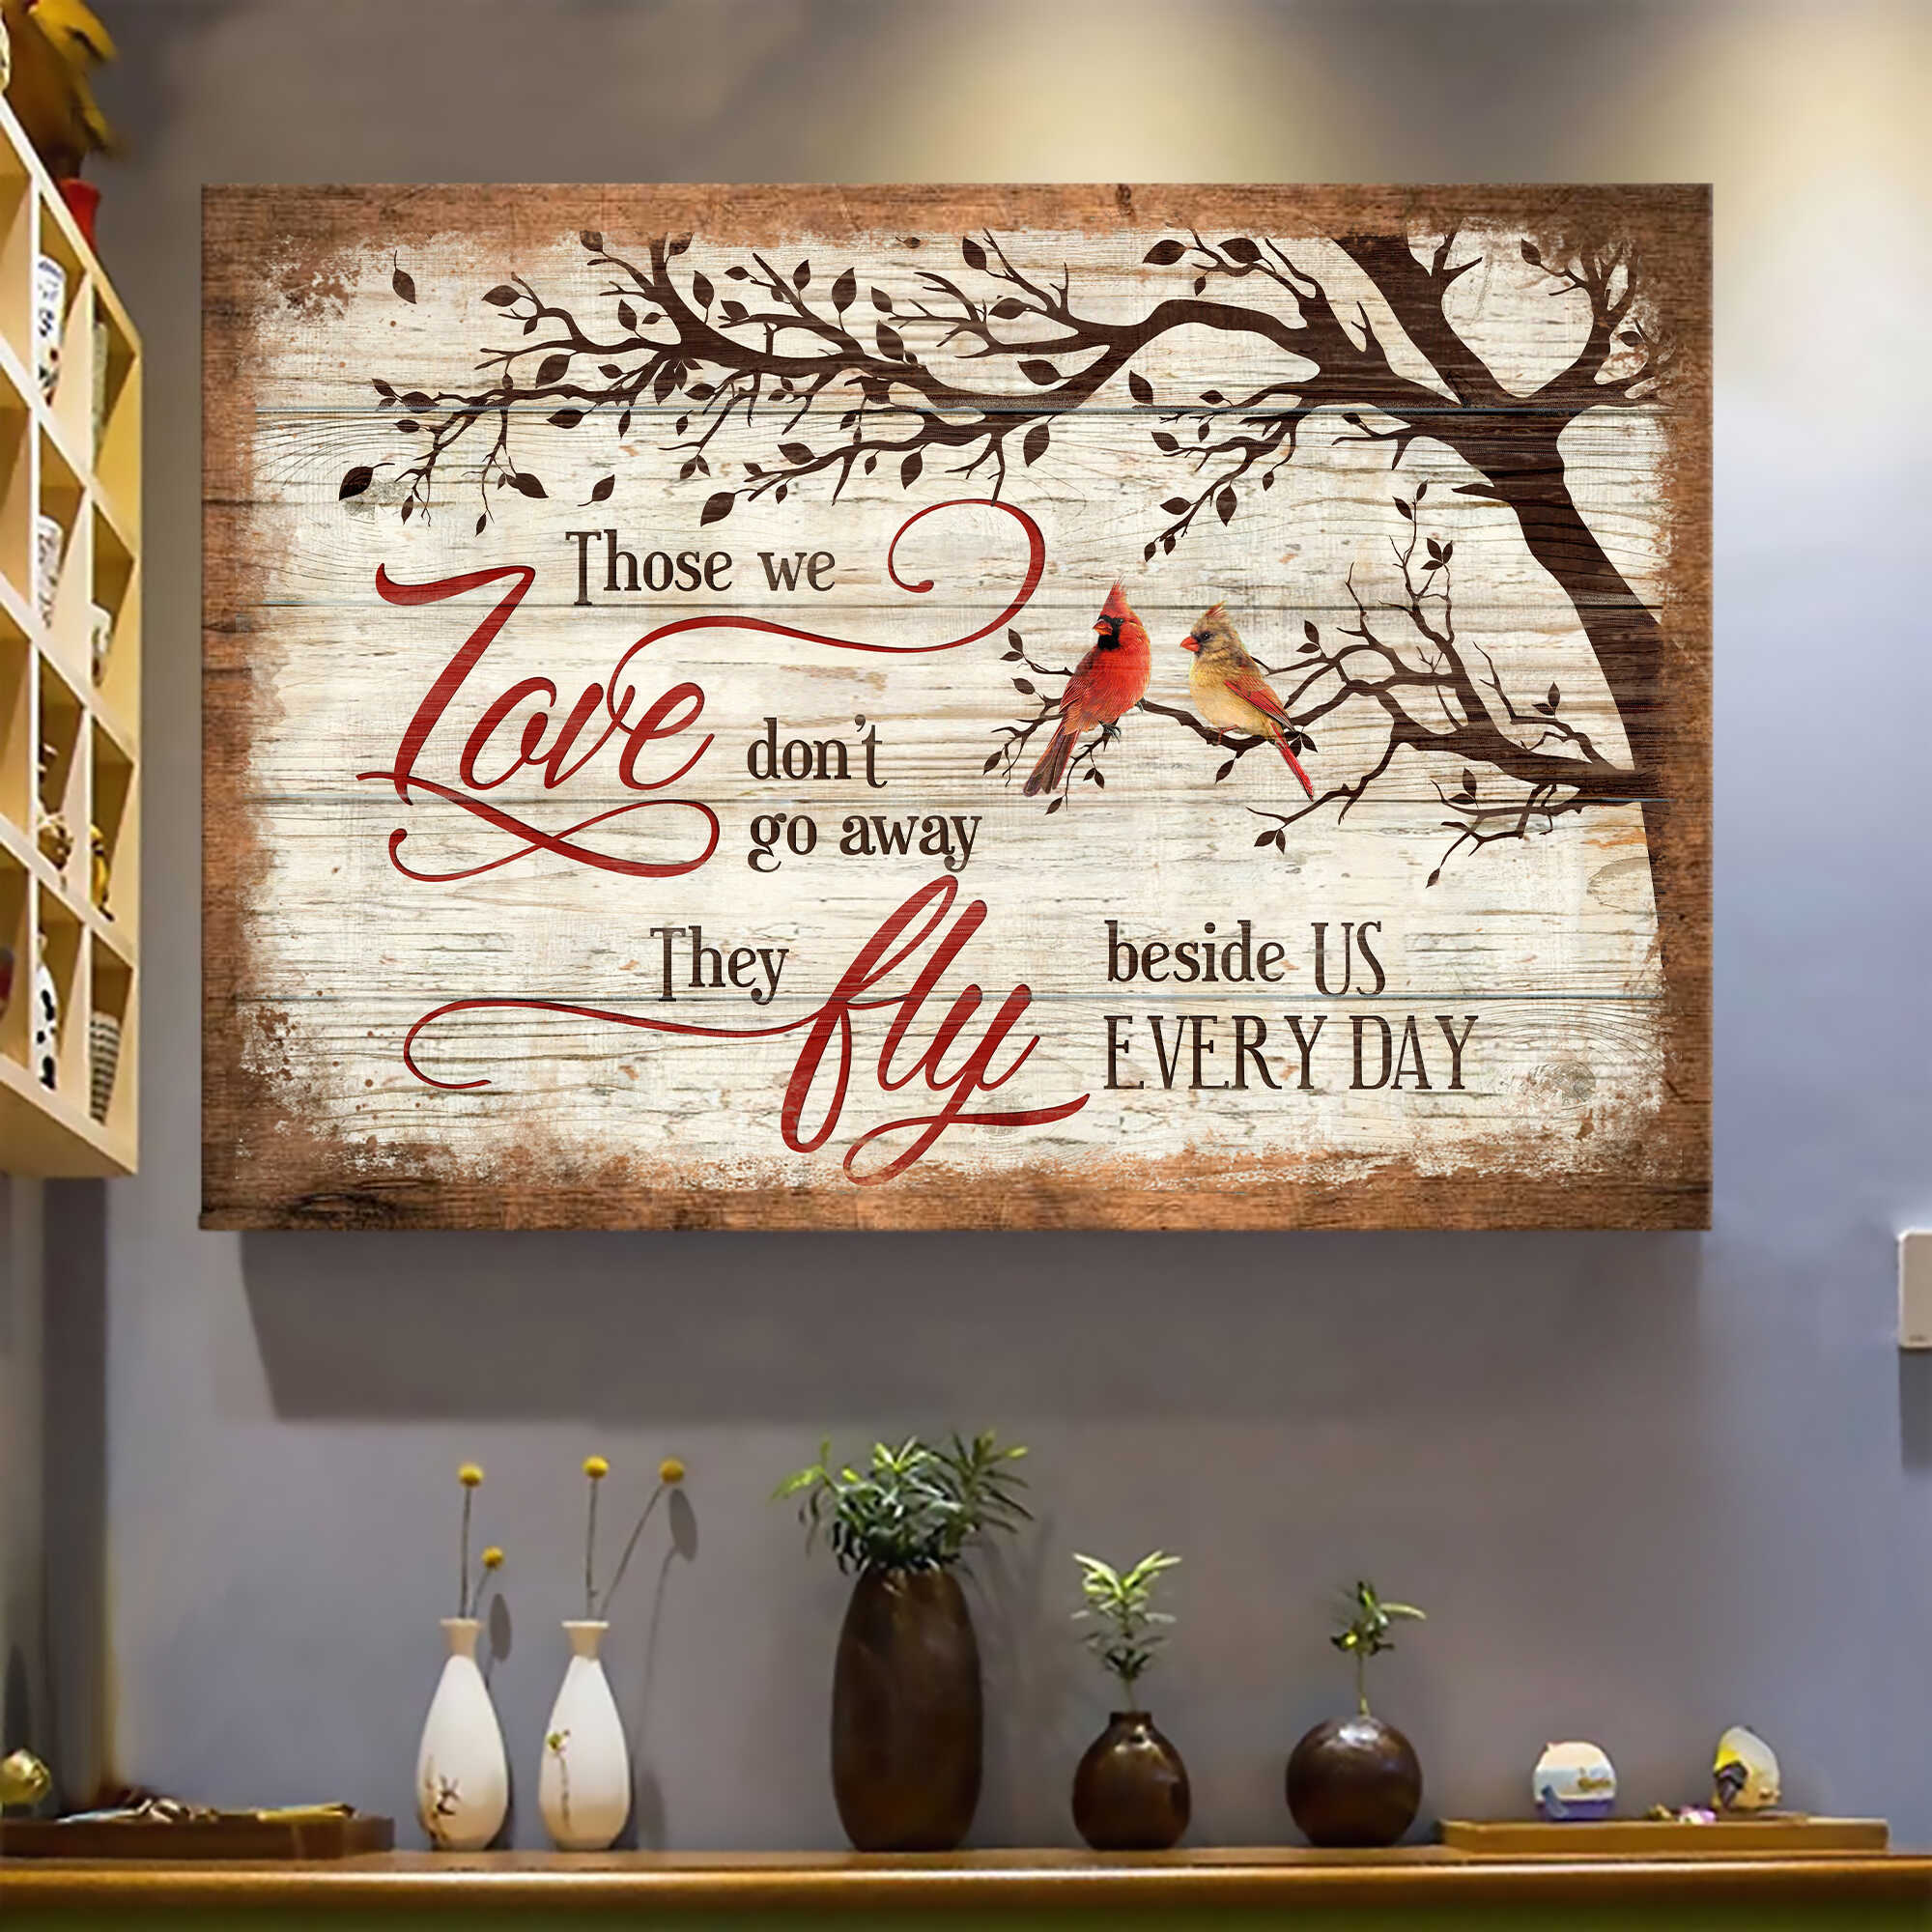 Cardinal, On the tree, Those we love don't go away, they fly beside us every day - Heaven Landscape Canvas Prints, Wall Art